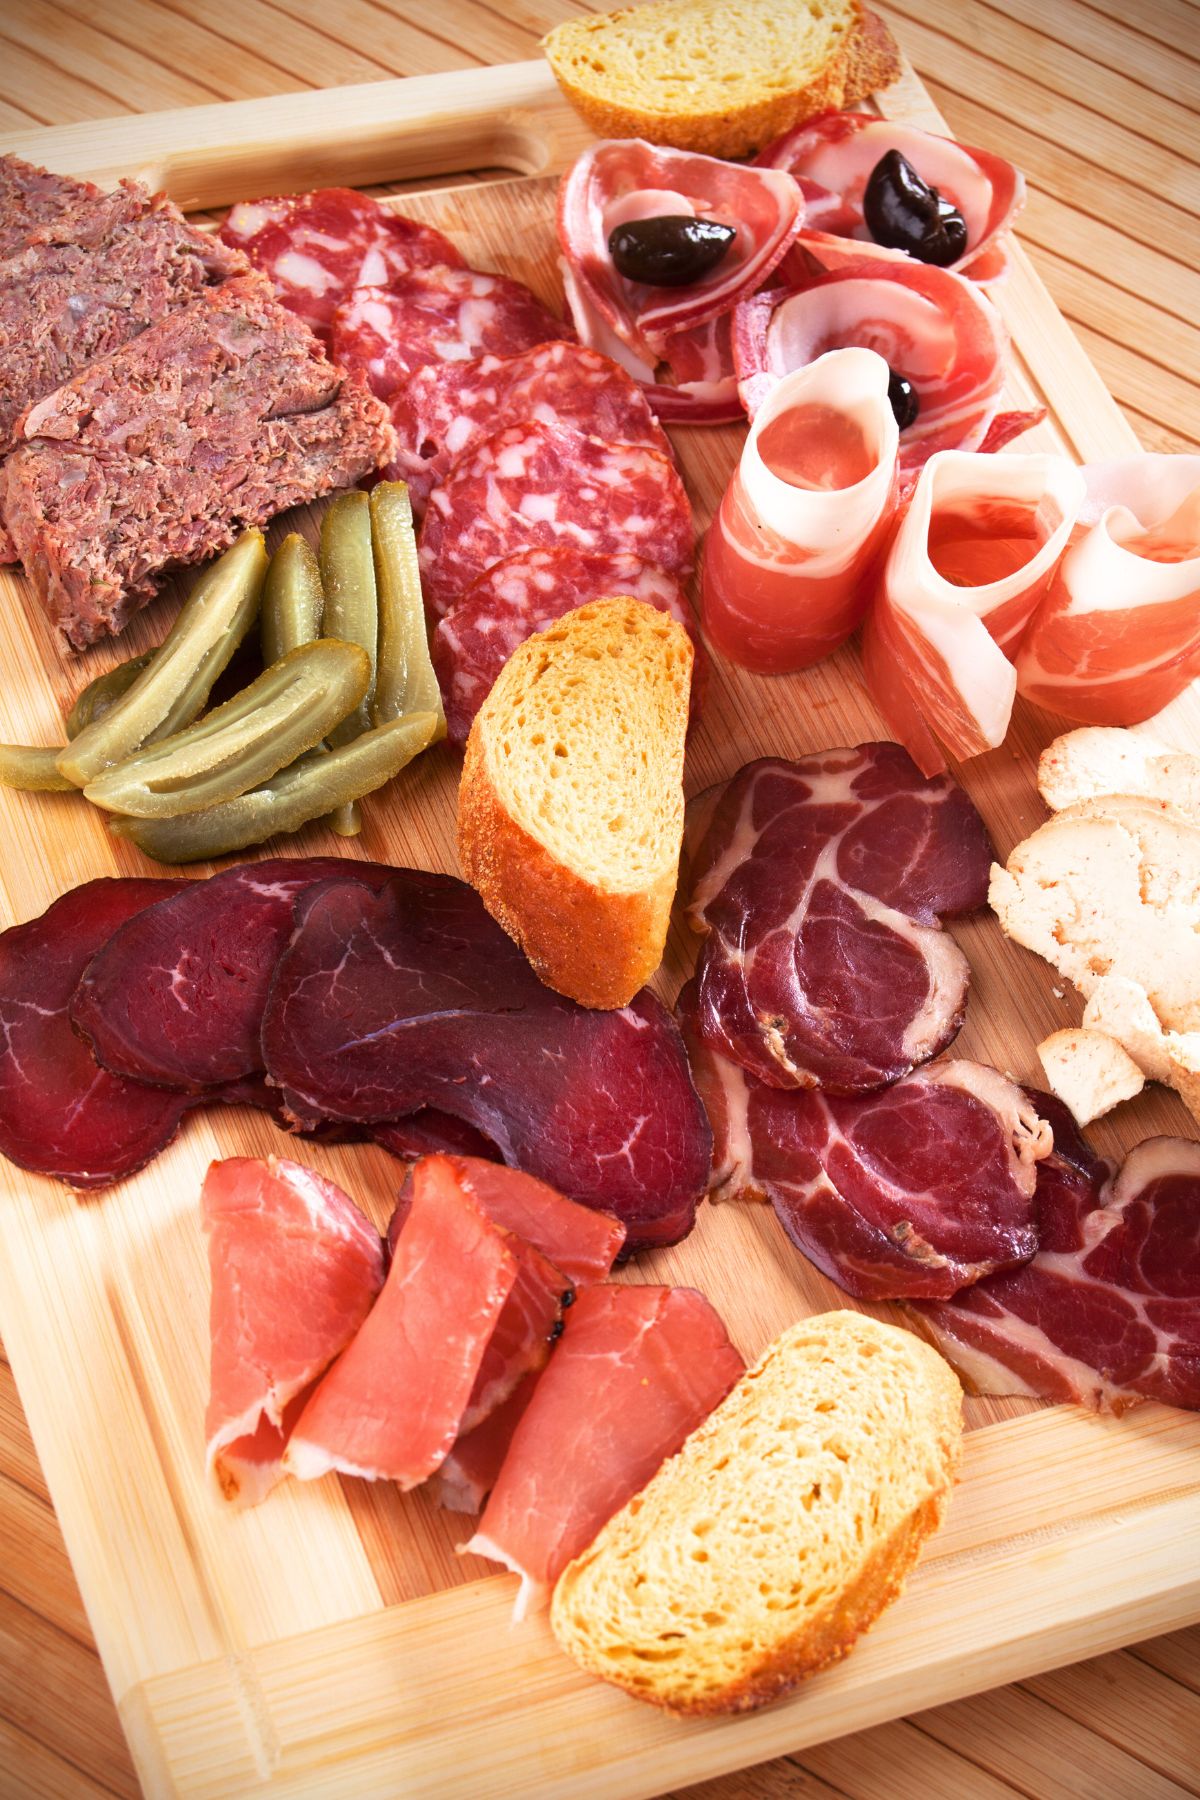 How to build a charcuterie board with a variety of meats on a wooden cutting board.